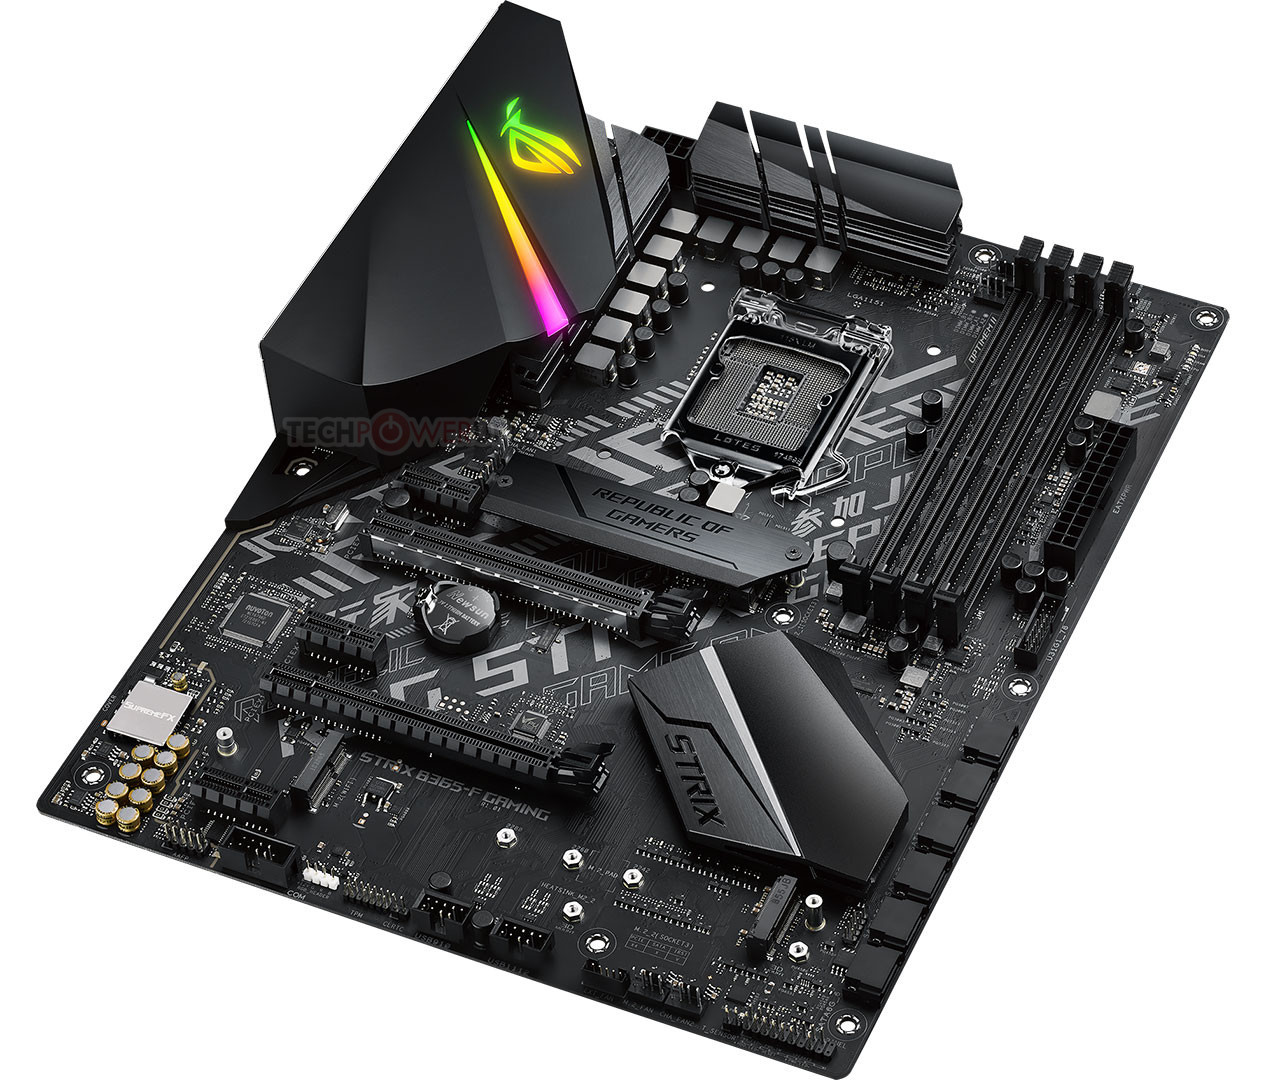 ASUS Also Outs ROG Strix B365-F Gaming Motherboard | TechPowerUp 